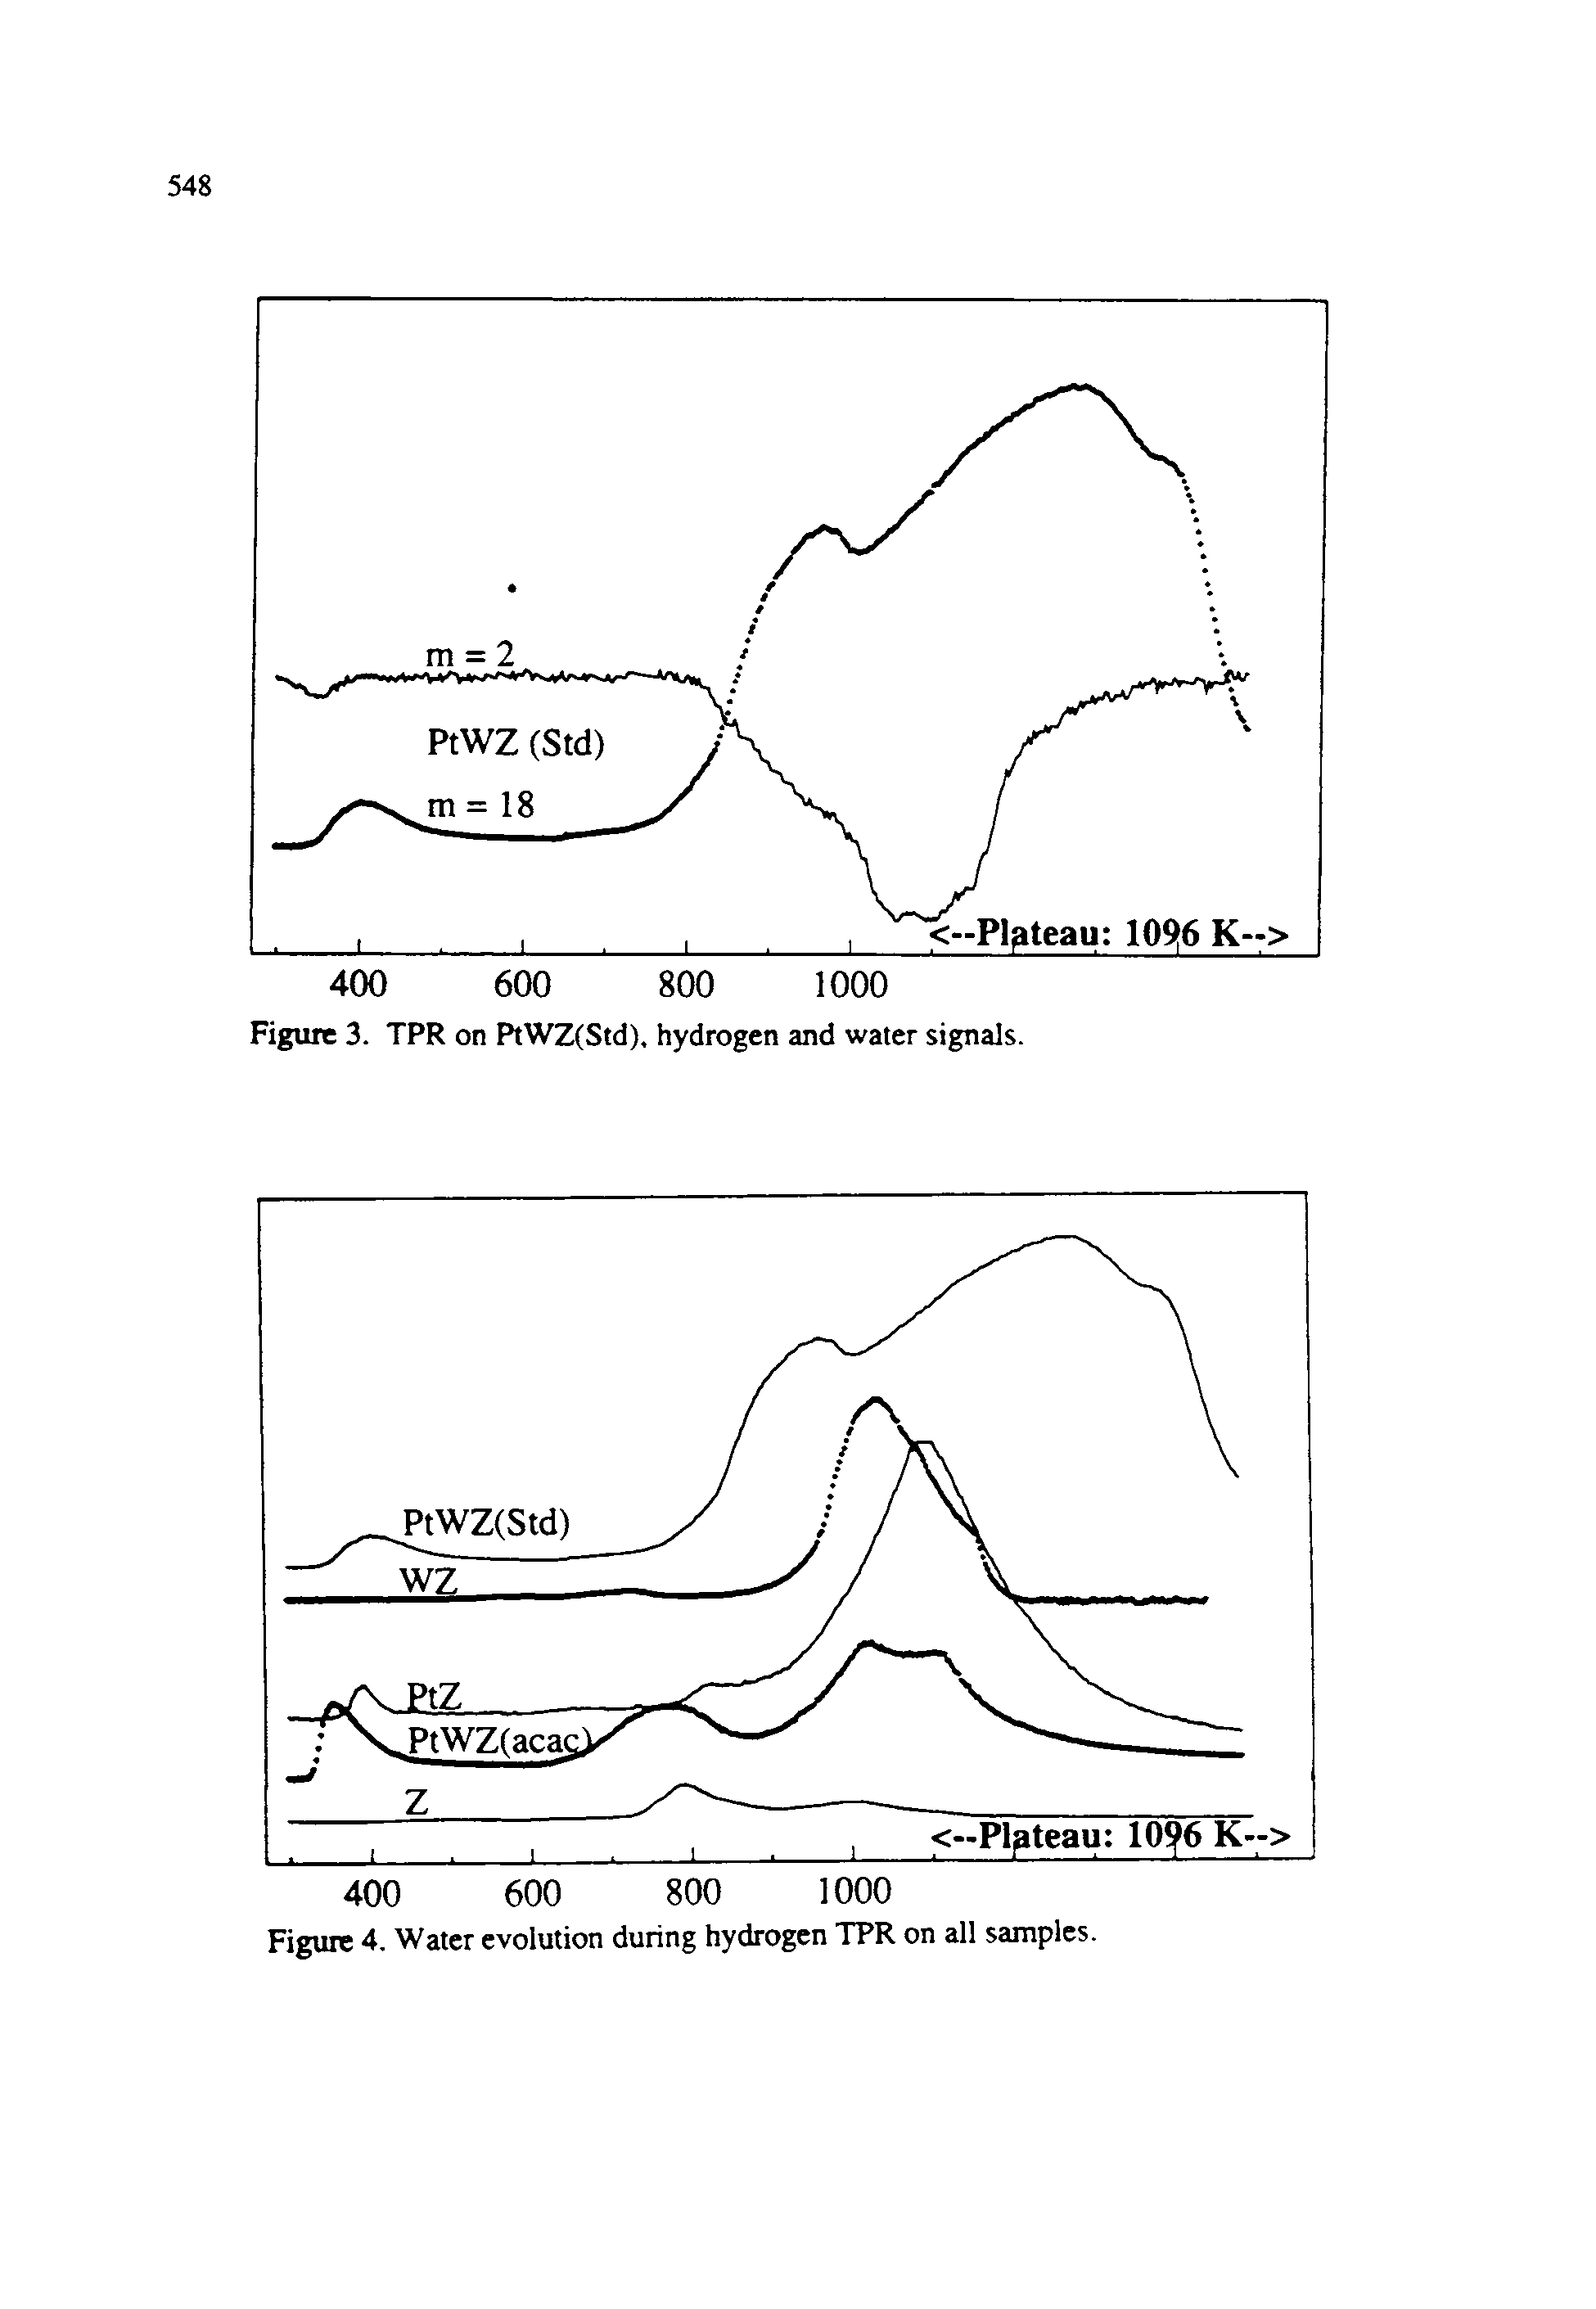 Figure 4. Water evolution during hydrogen TPR on all samples.